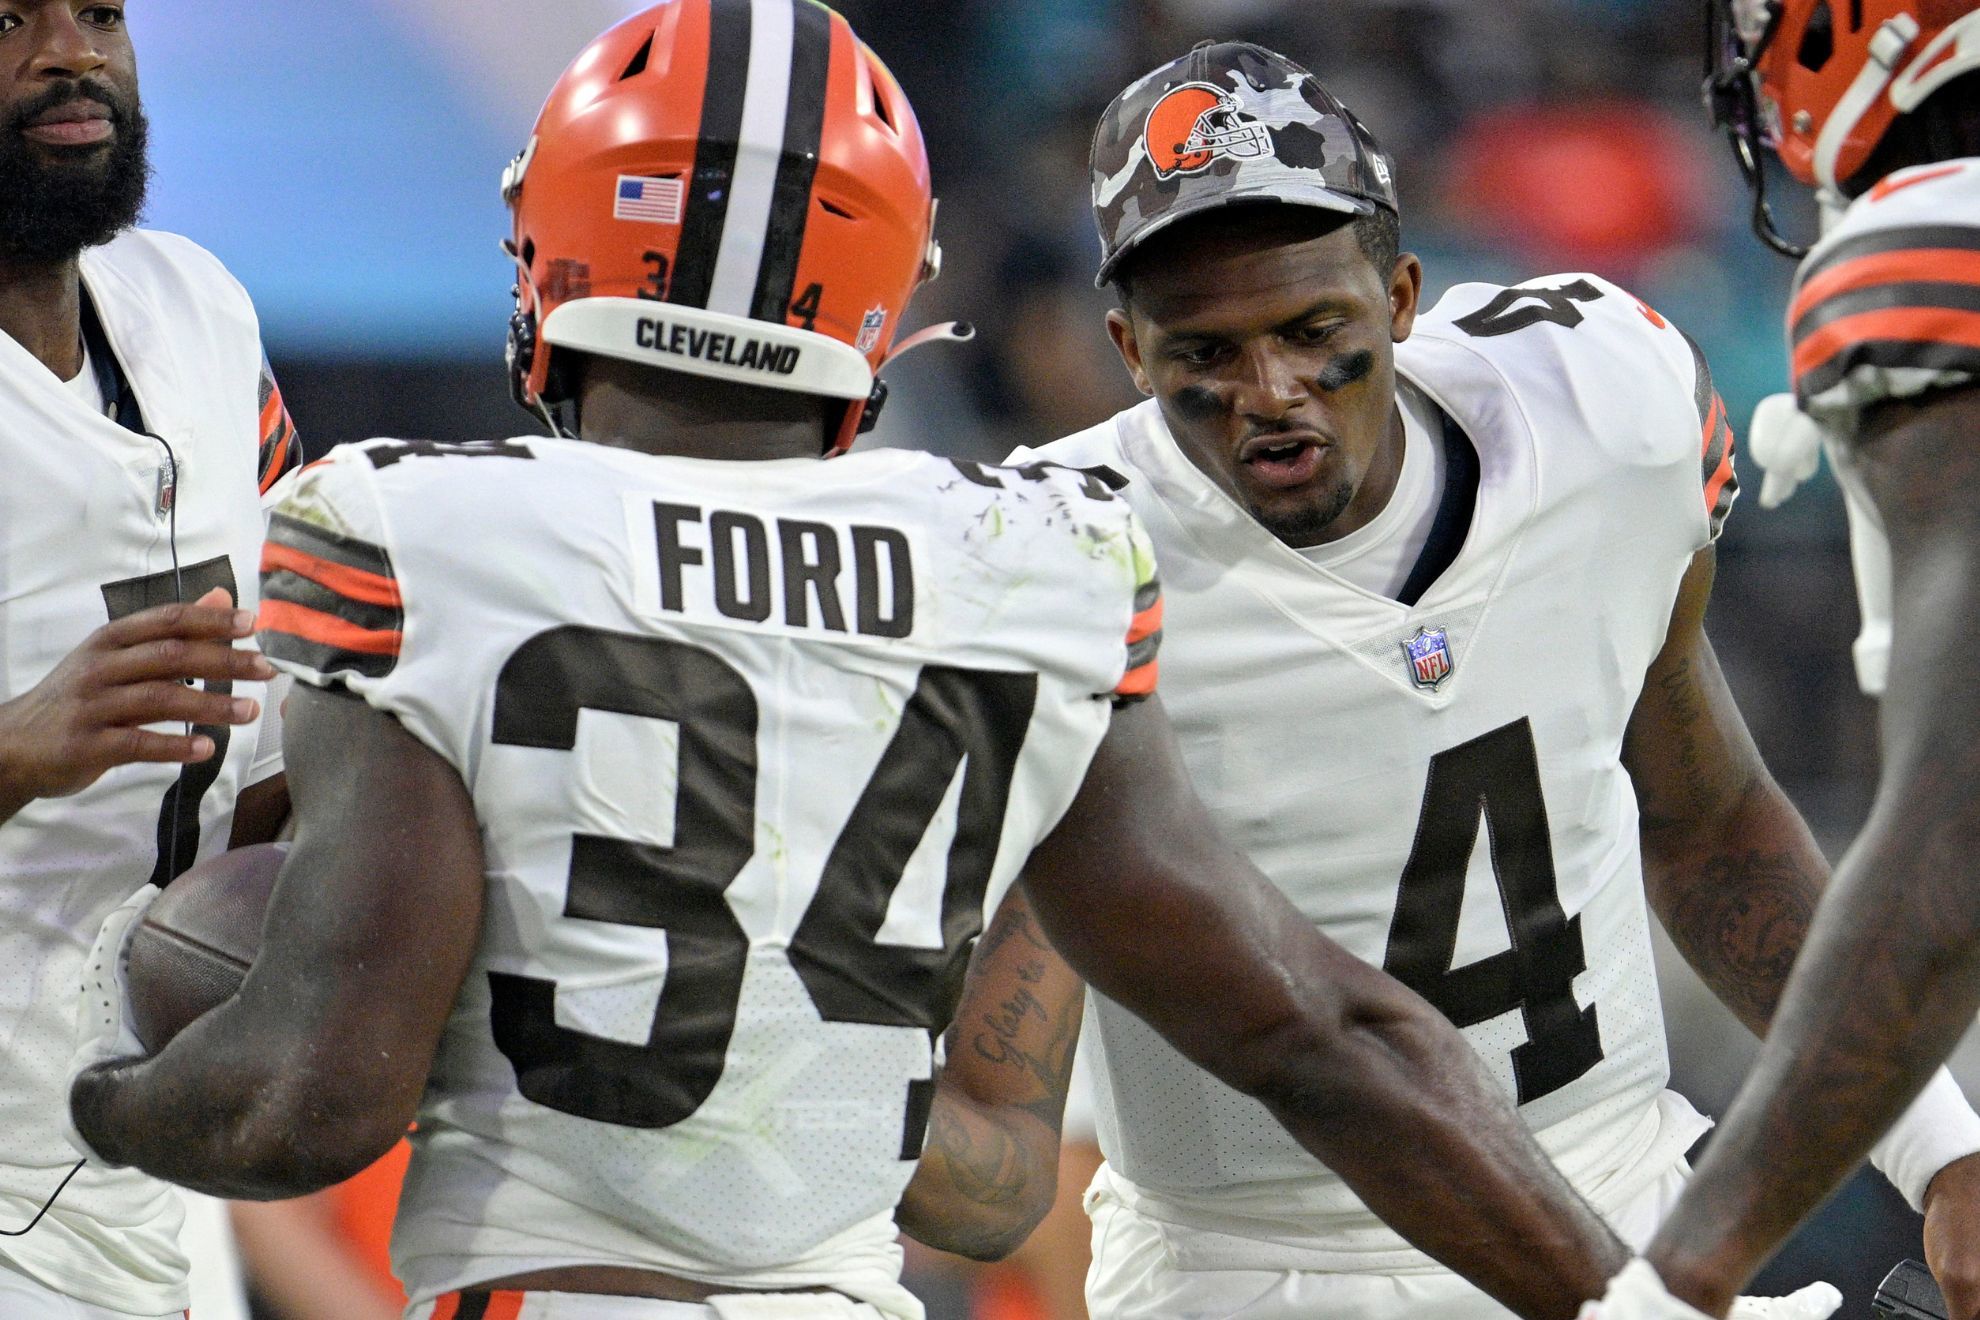 Nick Chubb injury: Pros and cons of picking up Browns backup RB Jerome Ford